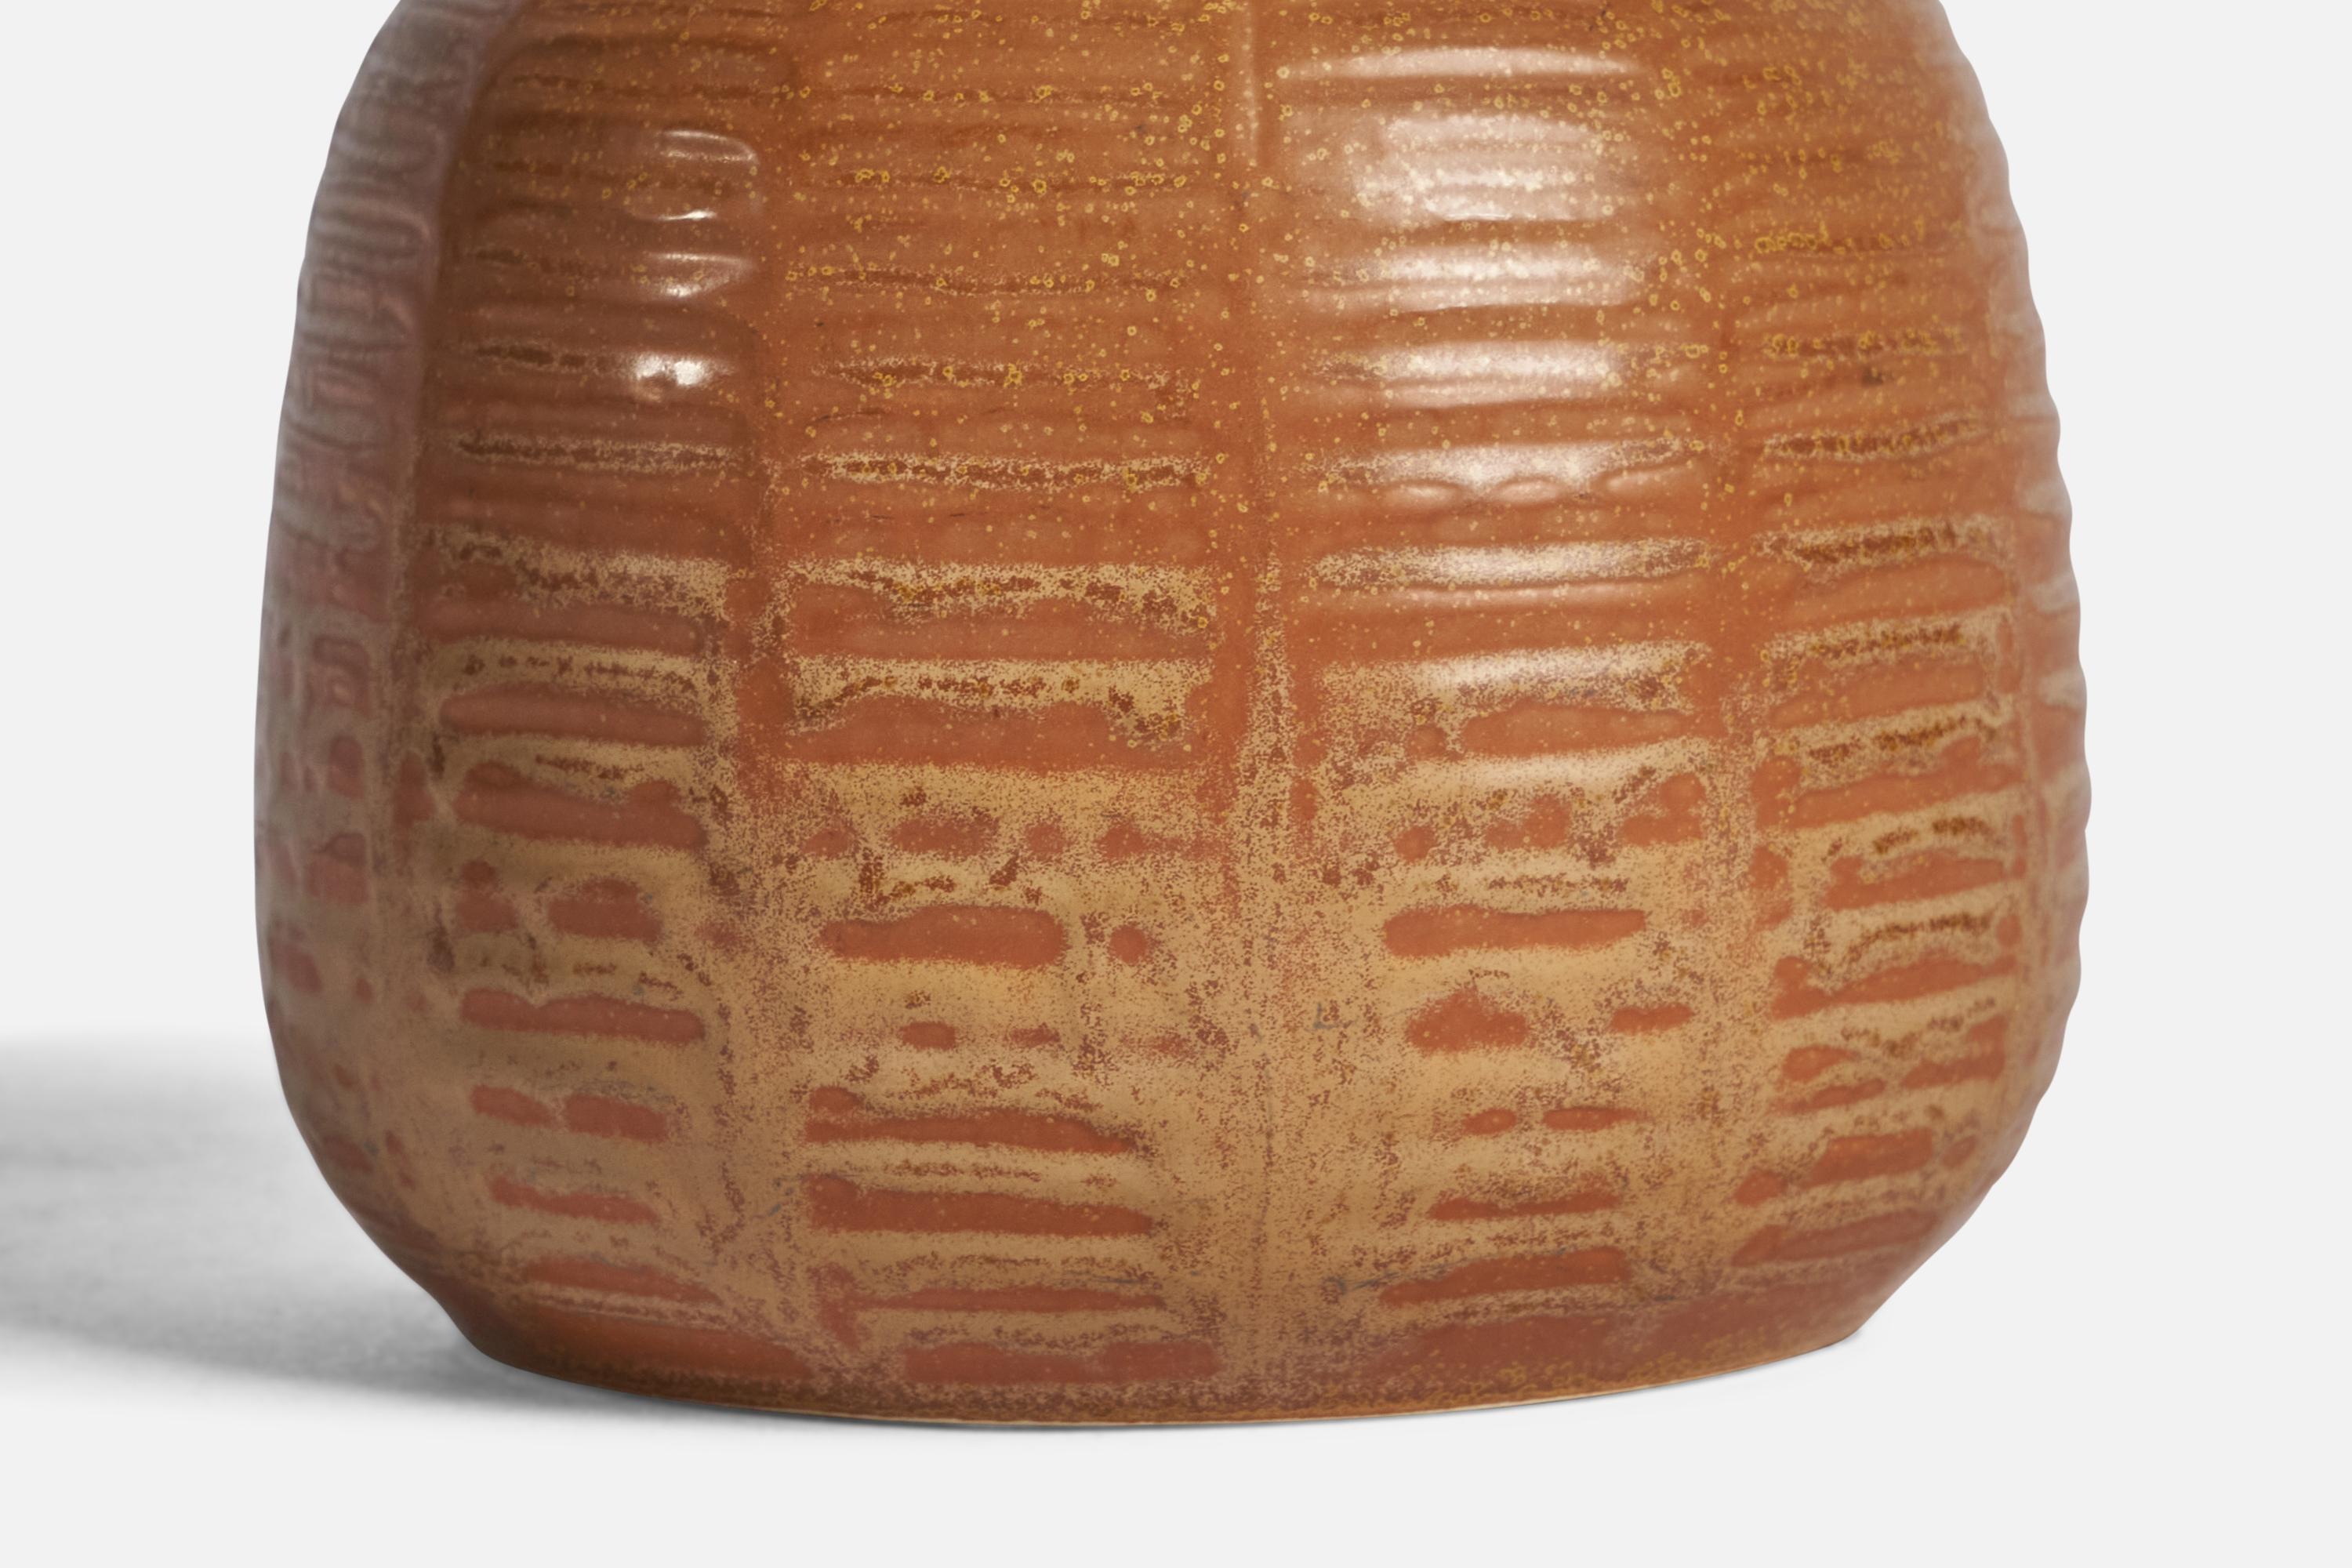 Figgjo Fajanse, Vase, Ceramic, Norway, 1974 In Good Condition For Sale In High Point, NC